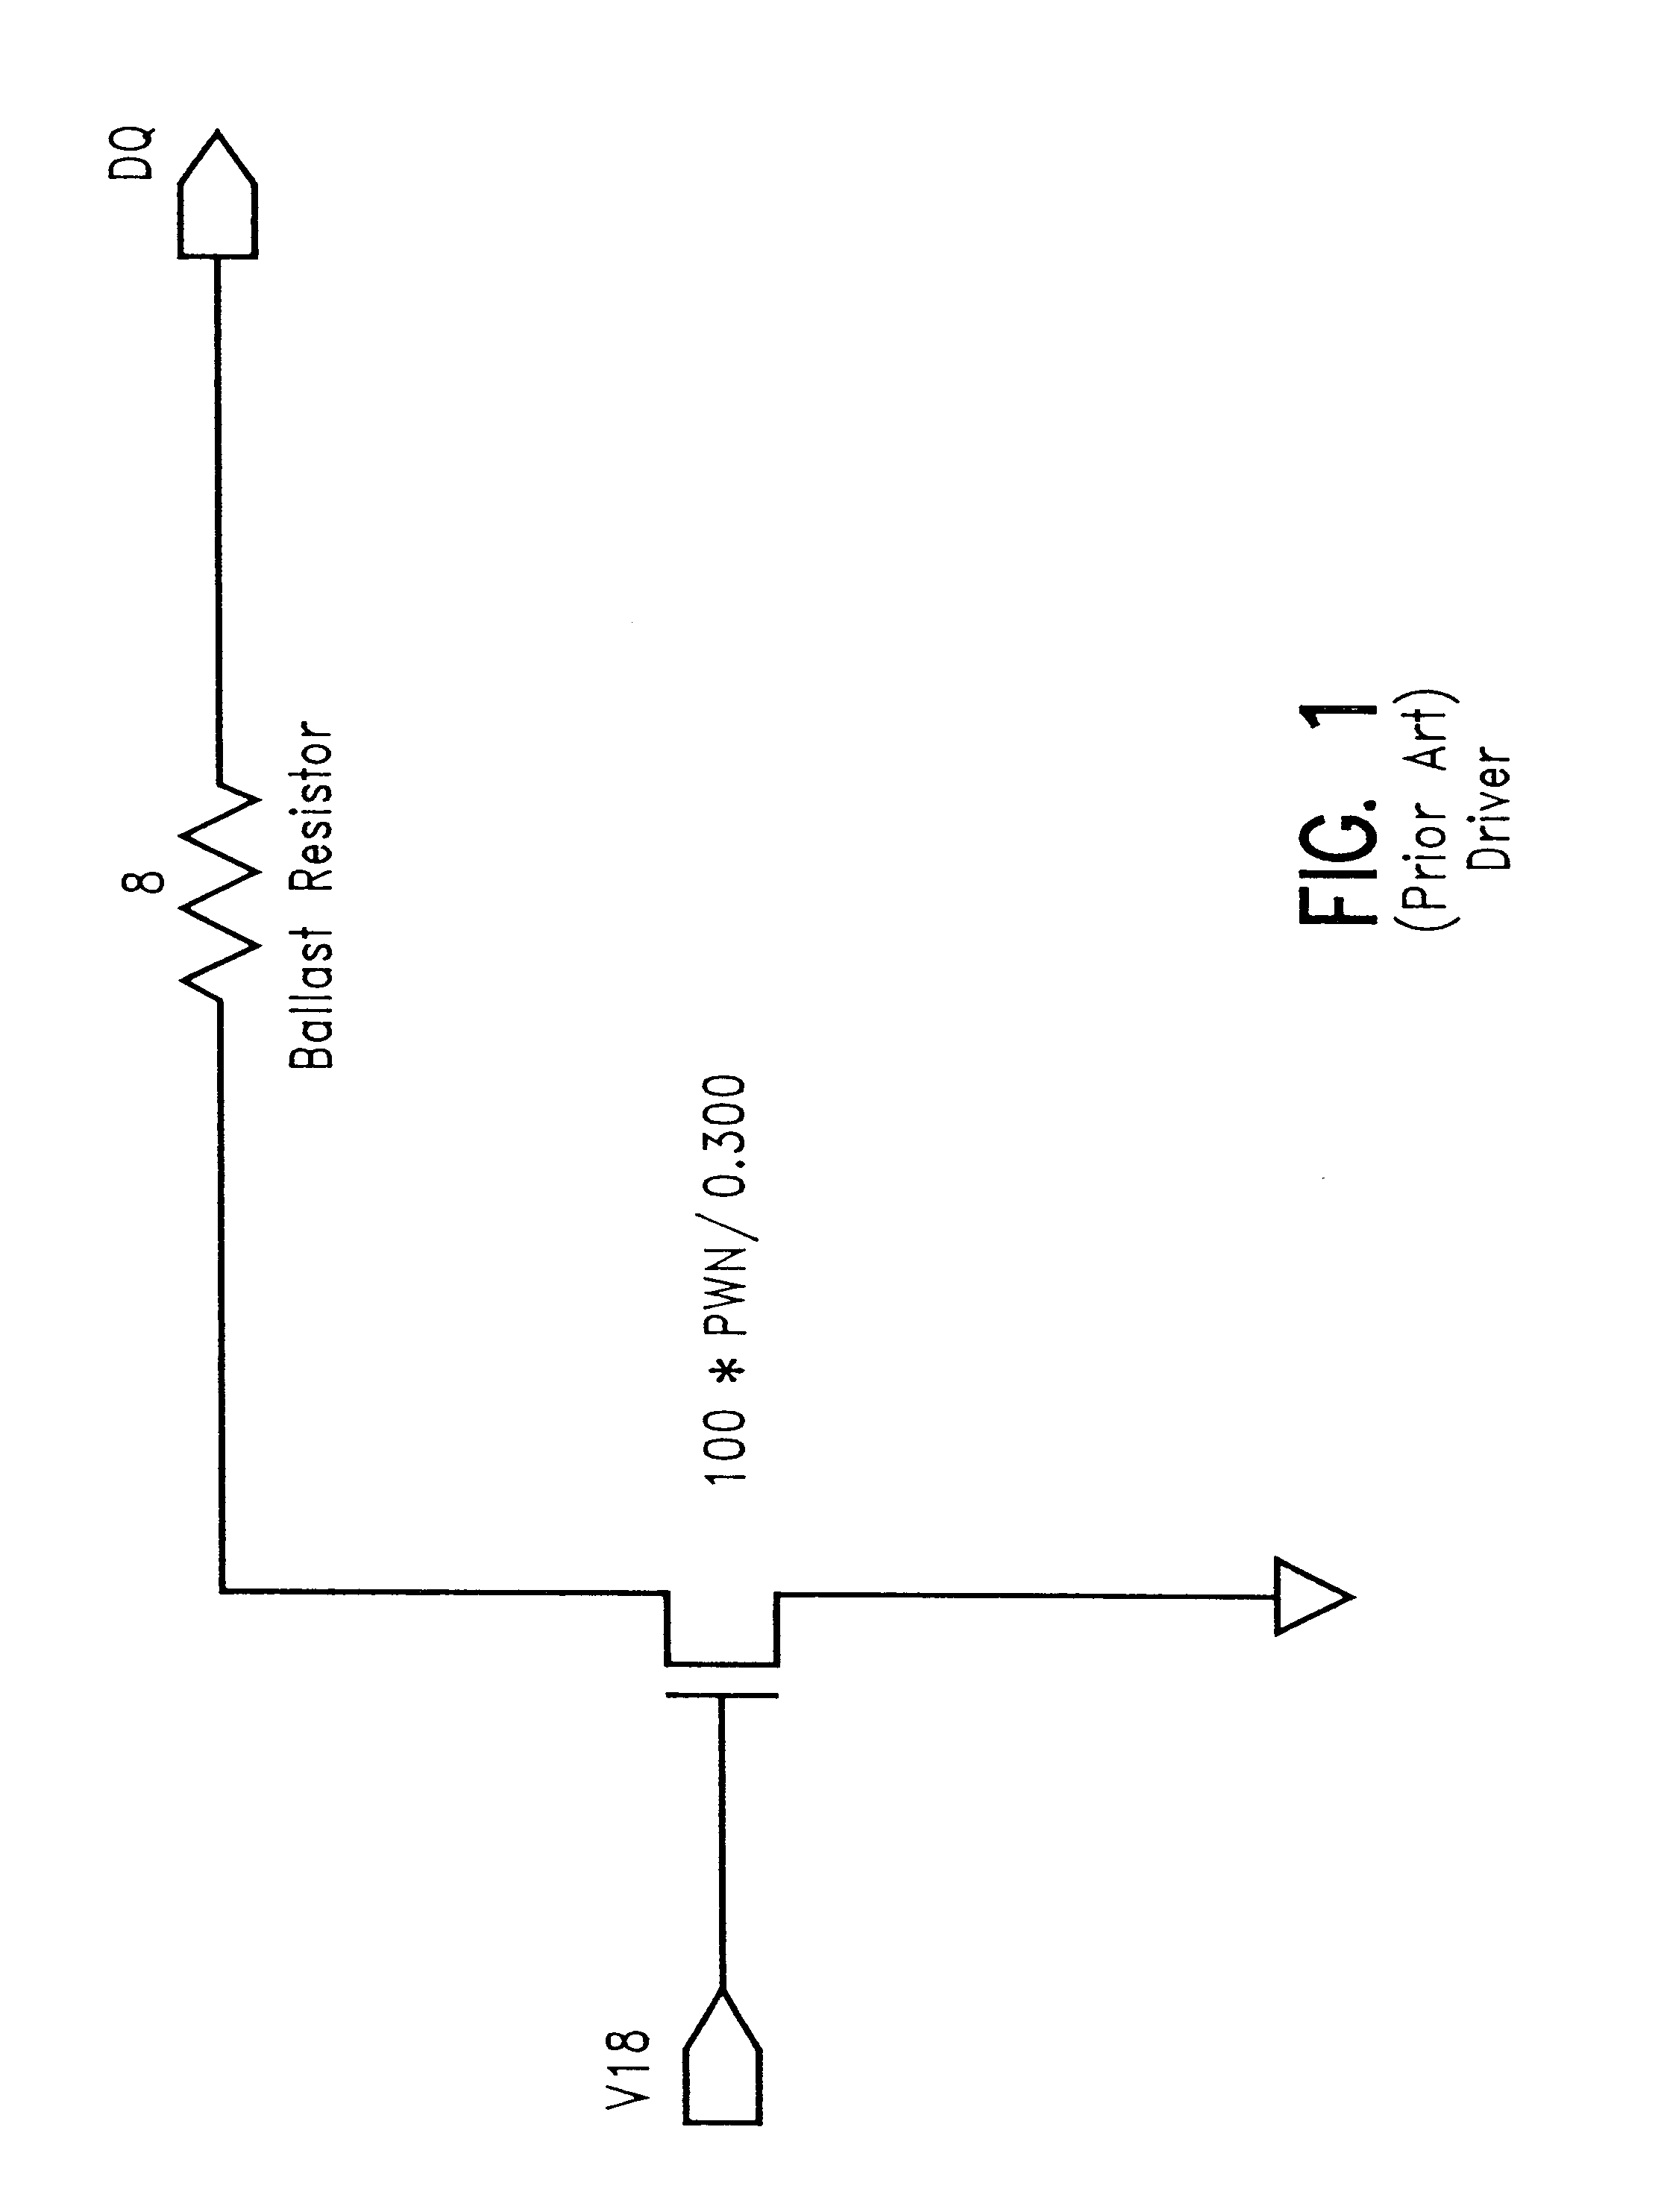 Constant impedance driver for high speed interface